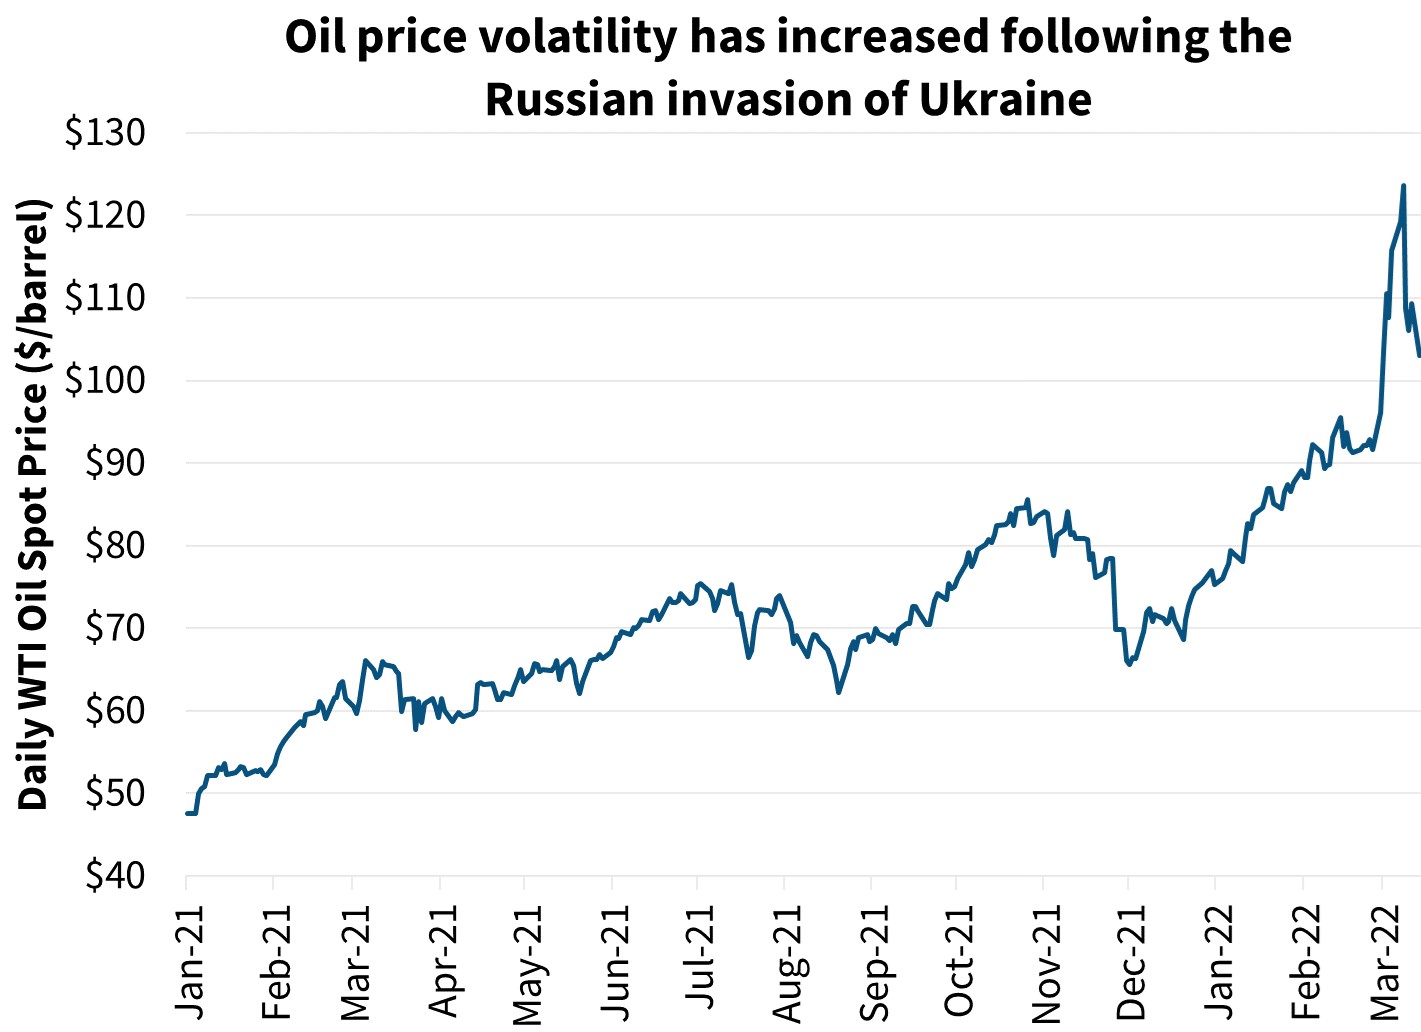  Oil price volatility have increased following the Russian invasion of Ukraine
